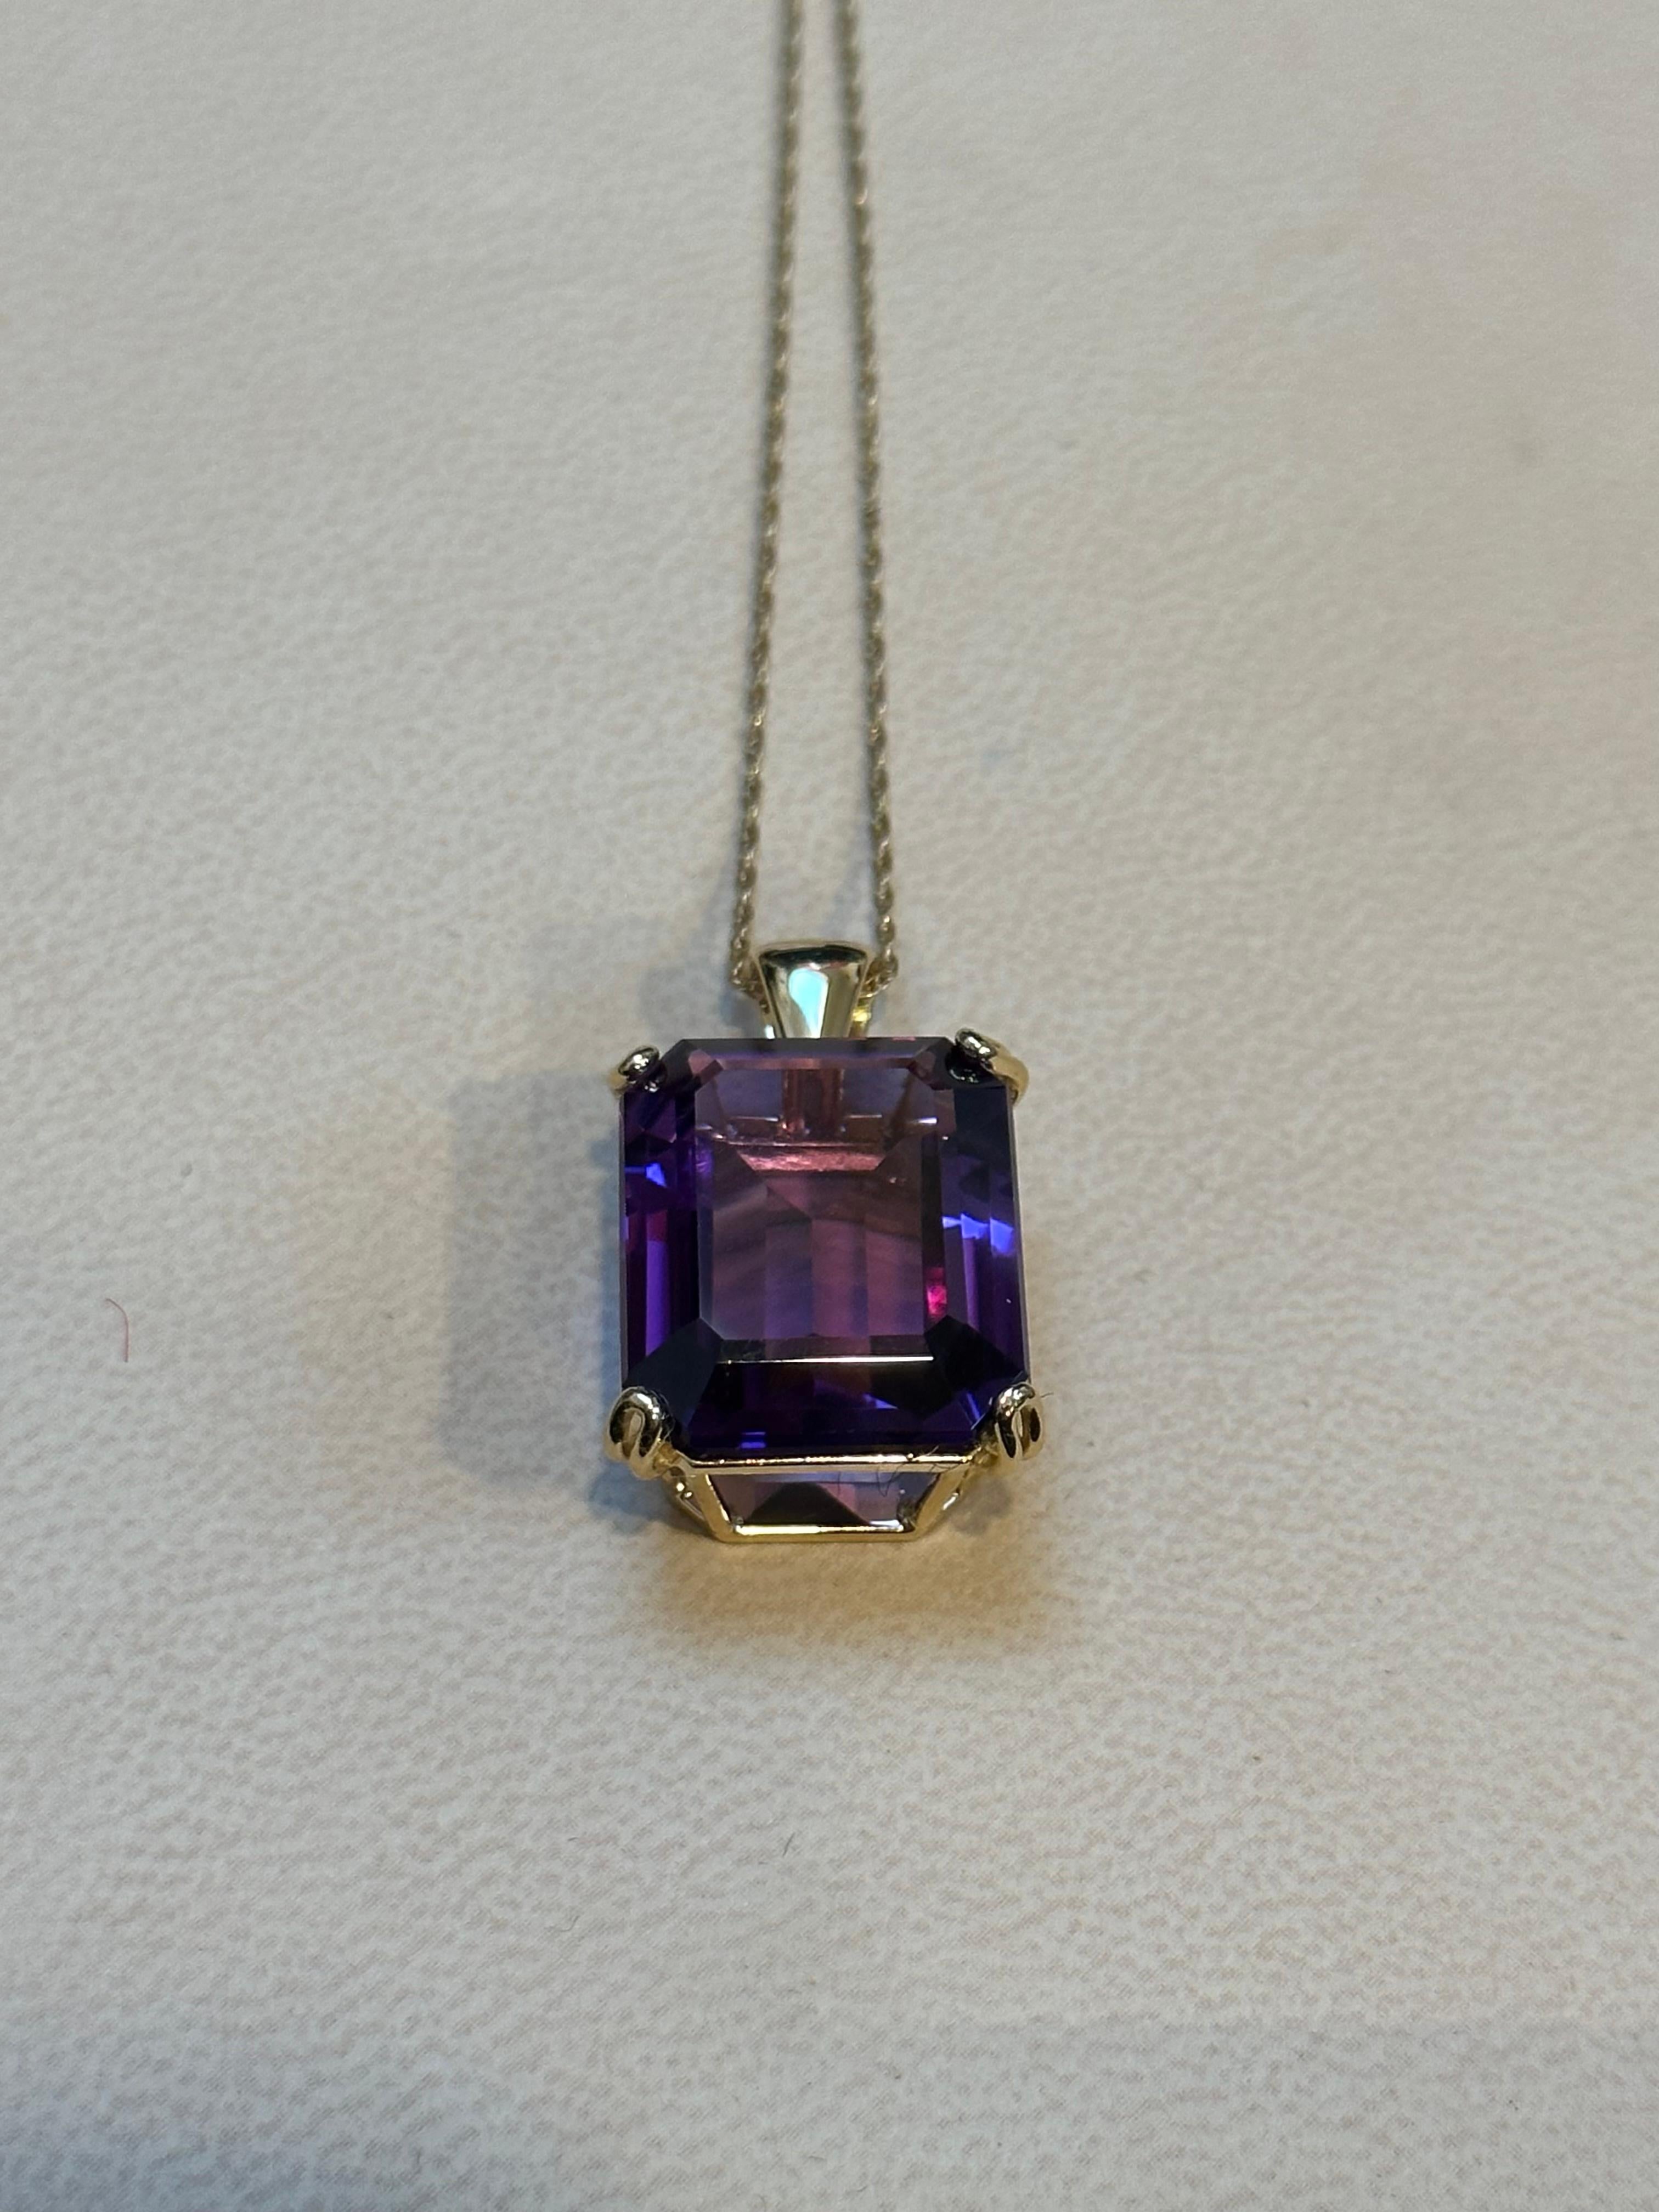 14 Ct Emerald Cut Amethyst Pendant/Neck 18Kt  Gold + 14 Kt Yellow Gold Chain For Sale 5